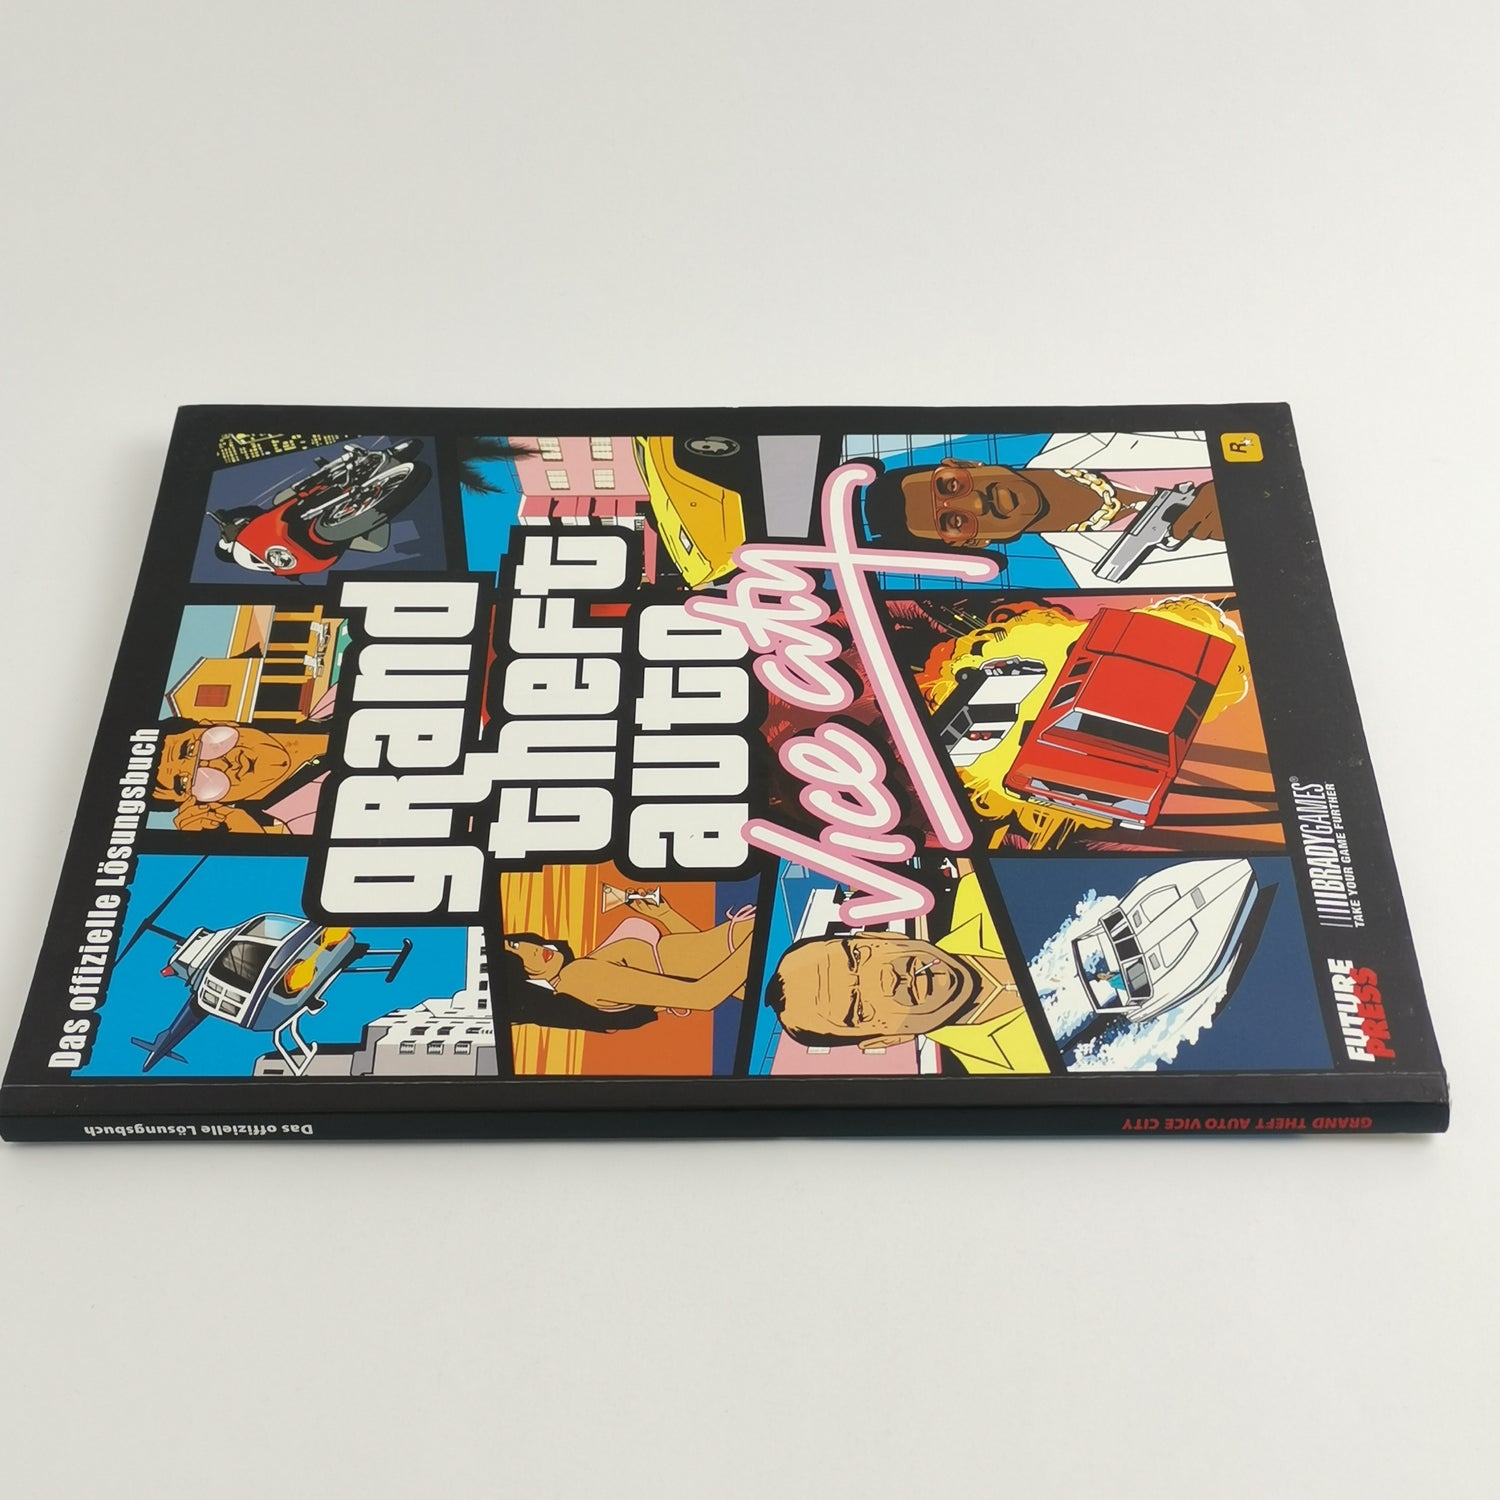 Sony Playstation 2 Game: Grand Theft Auto Vice City + Walkthrough Book | PS2 original packaging